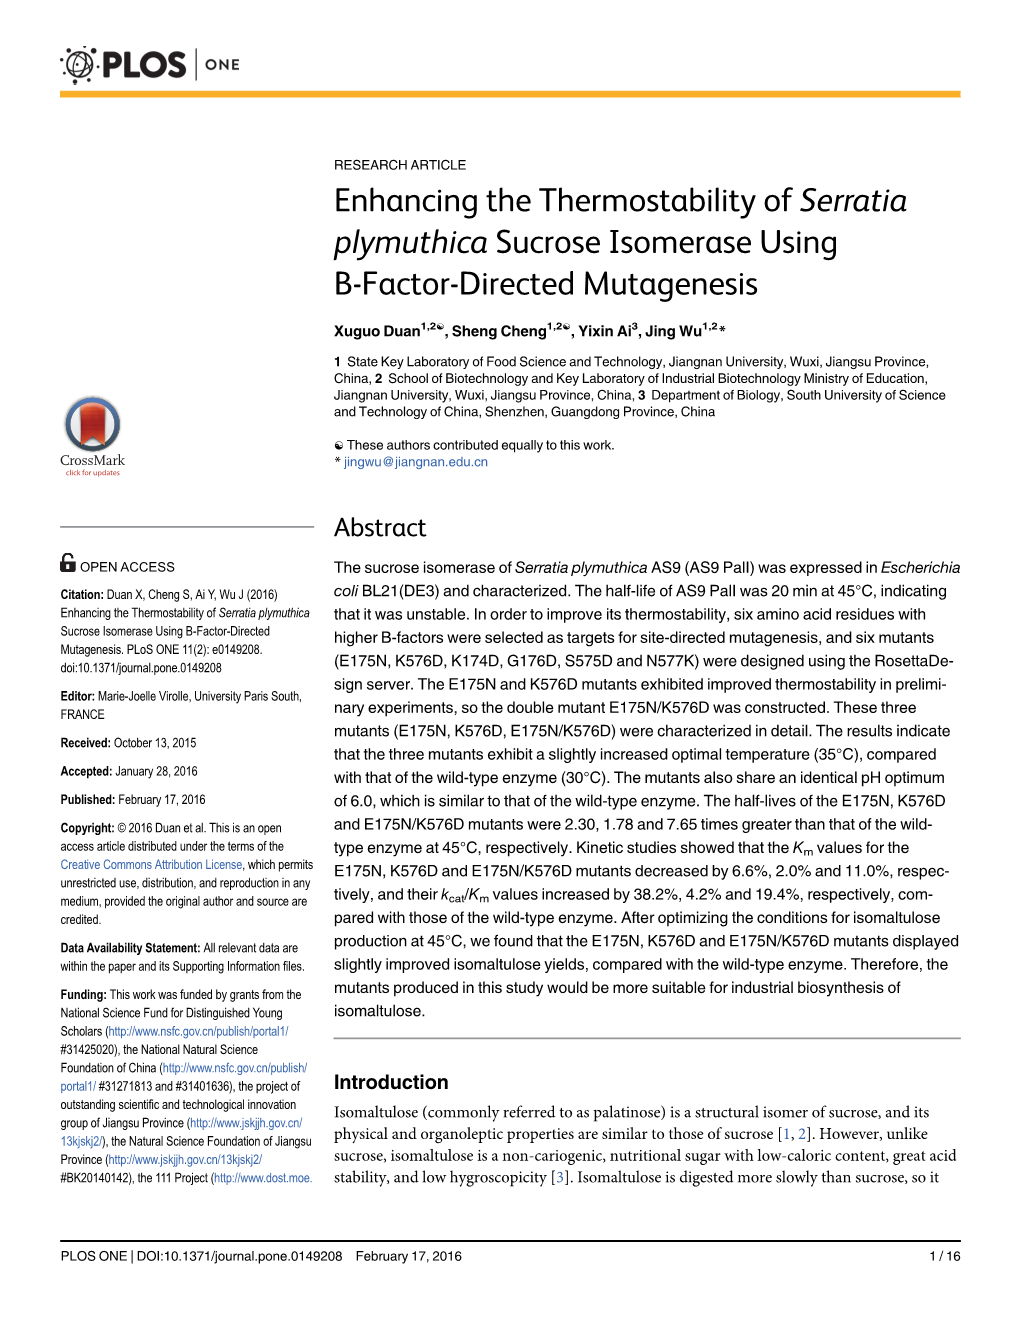 Enhancing the Thermostability of Serratia Plymuthica Sucrose Isomerase Using B-Factor-Directed Mutagenesis